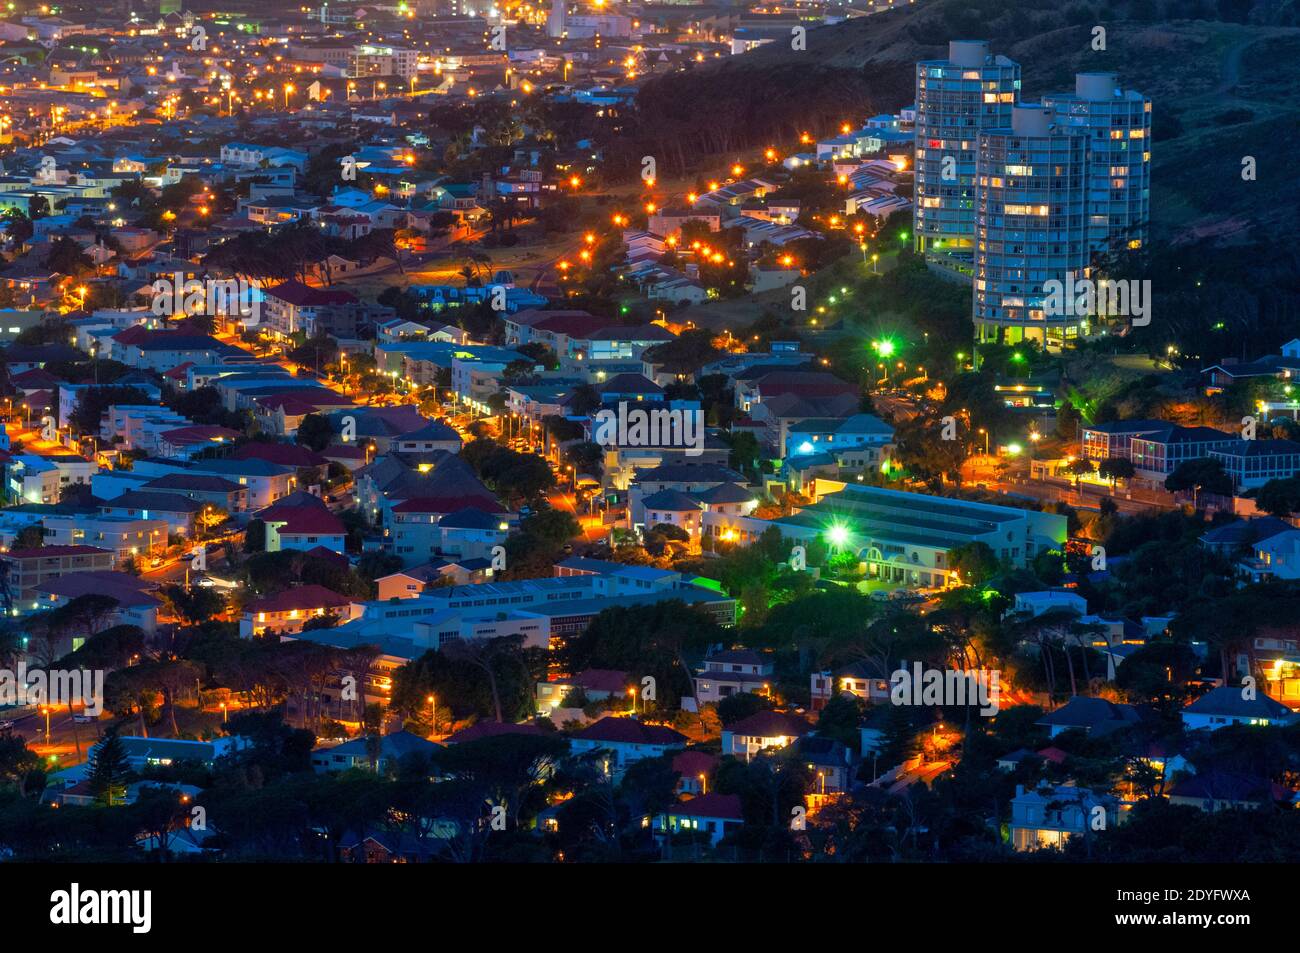 The suburb of Vredehoek, Cape Town, South Africa Stock Photo